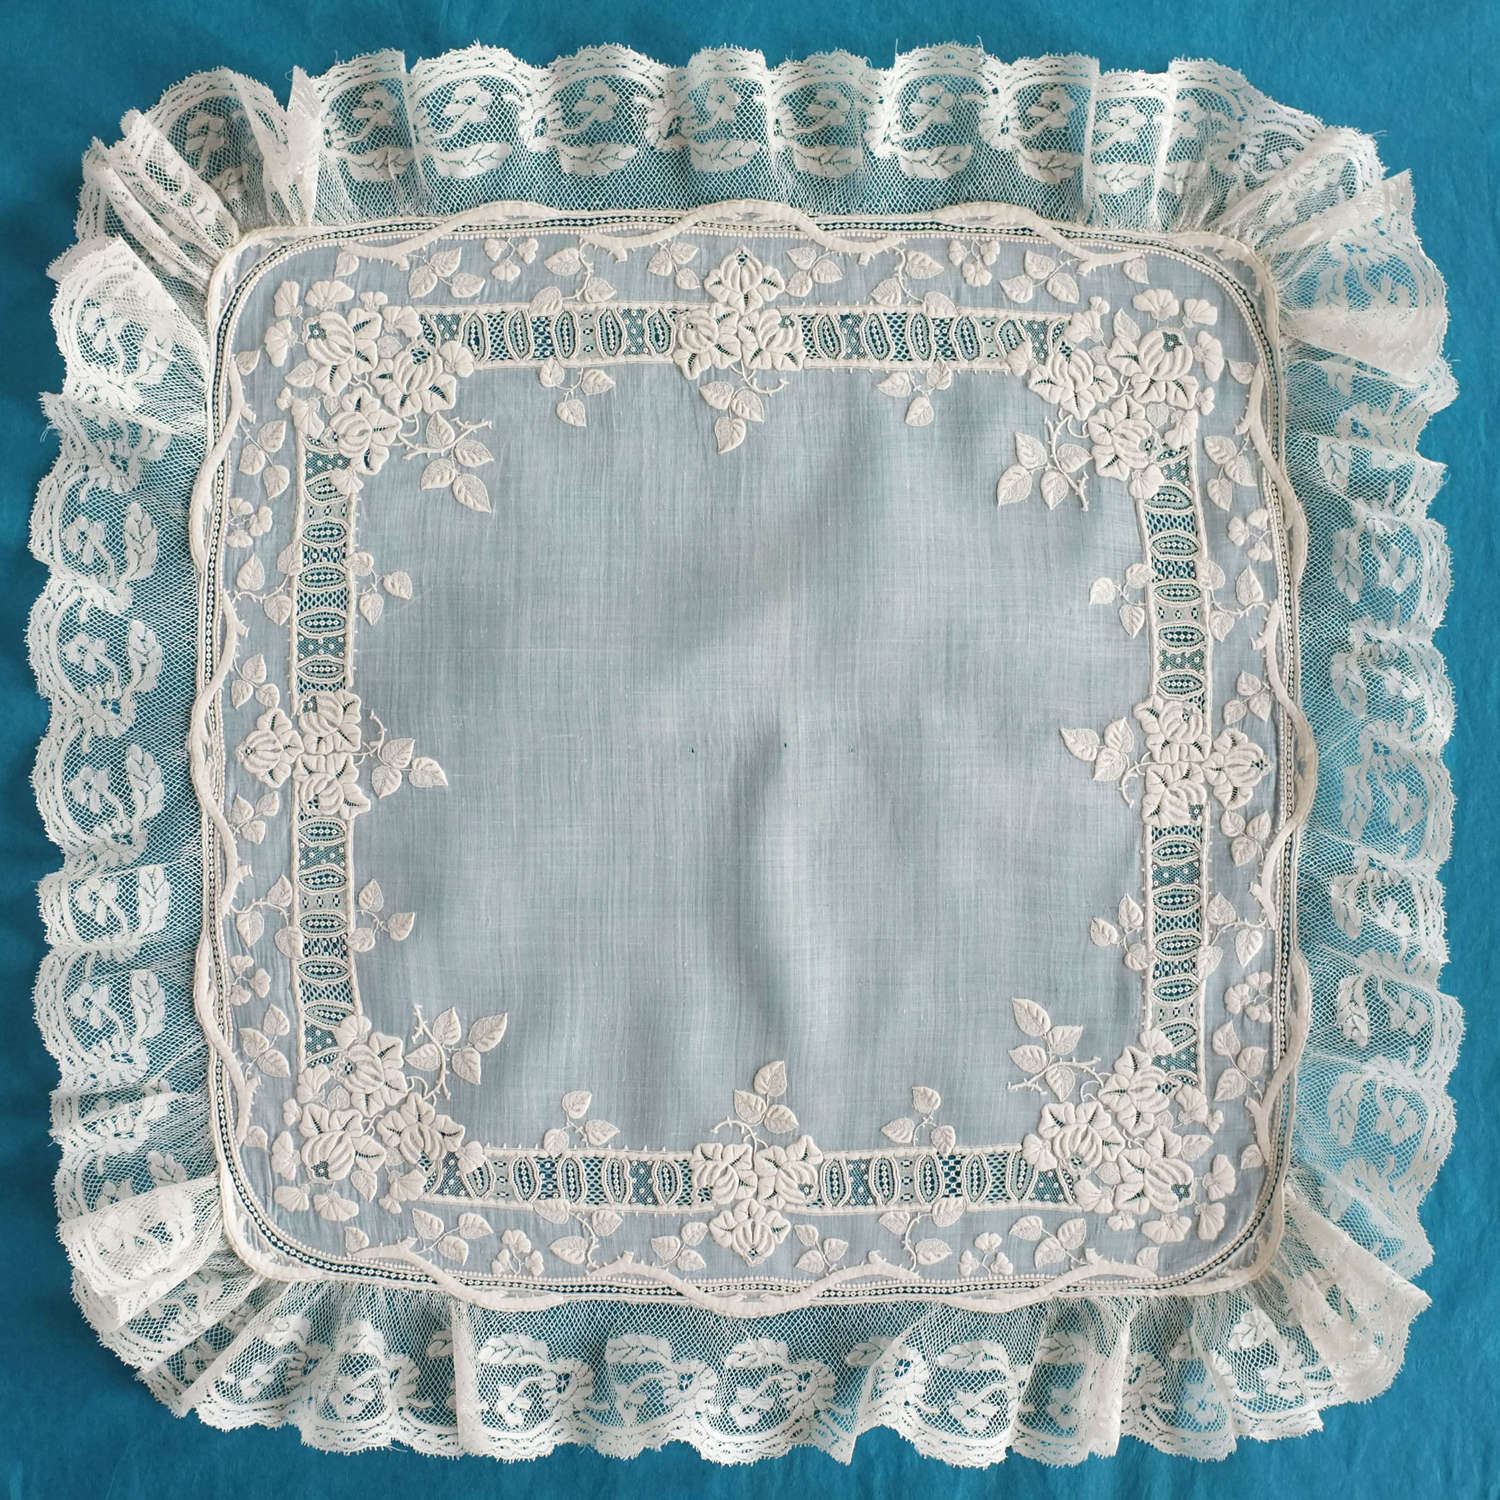 Antique Whitework Handkerchief with Roses